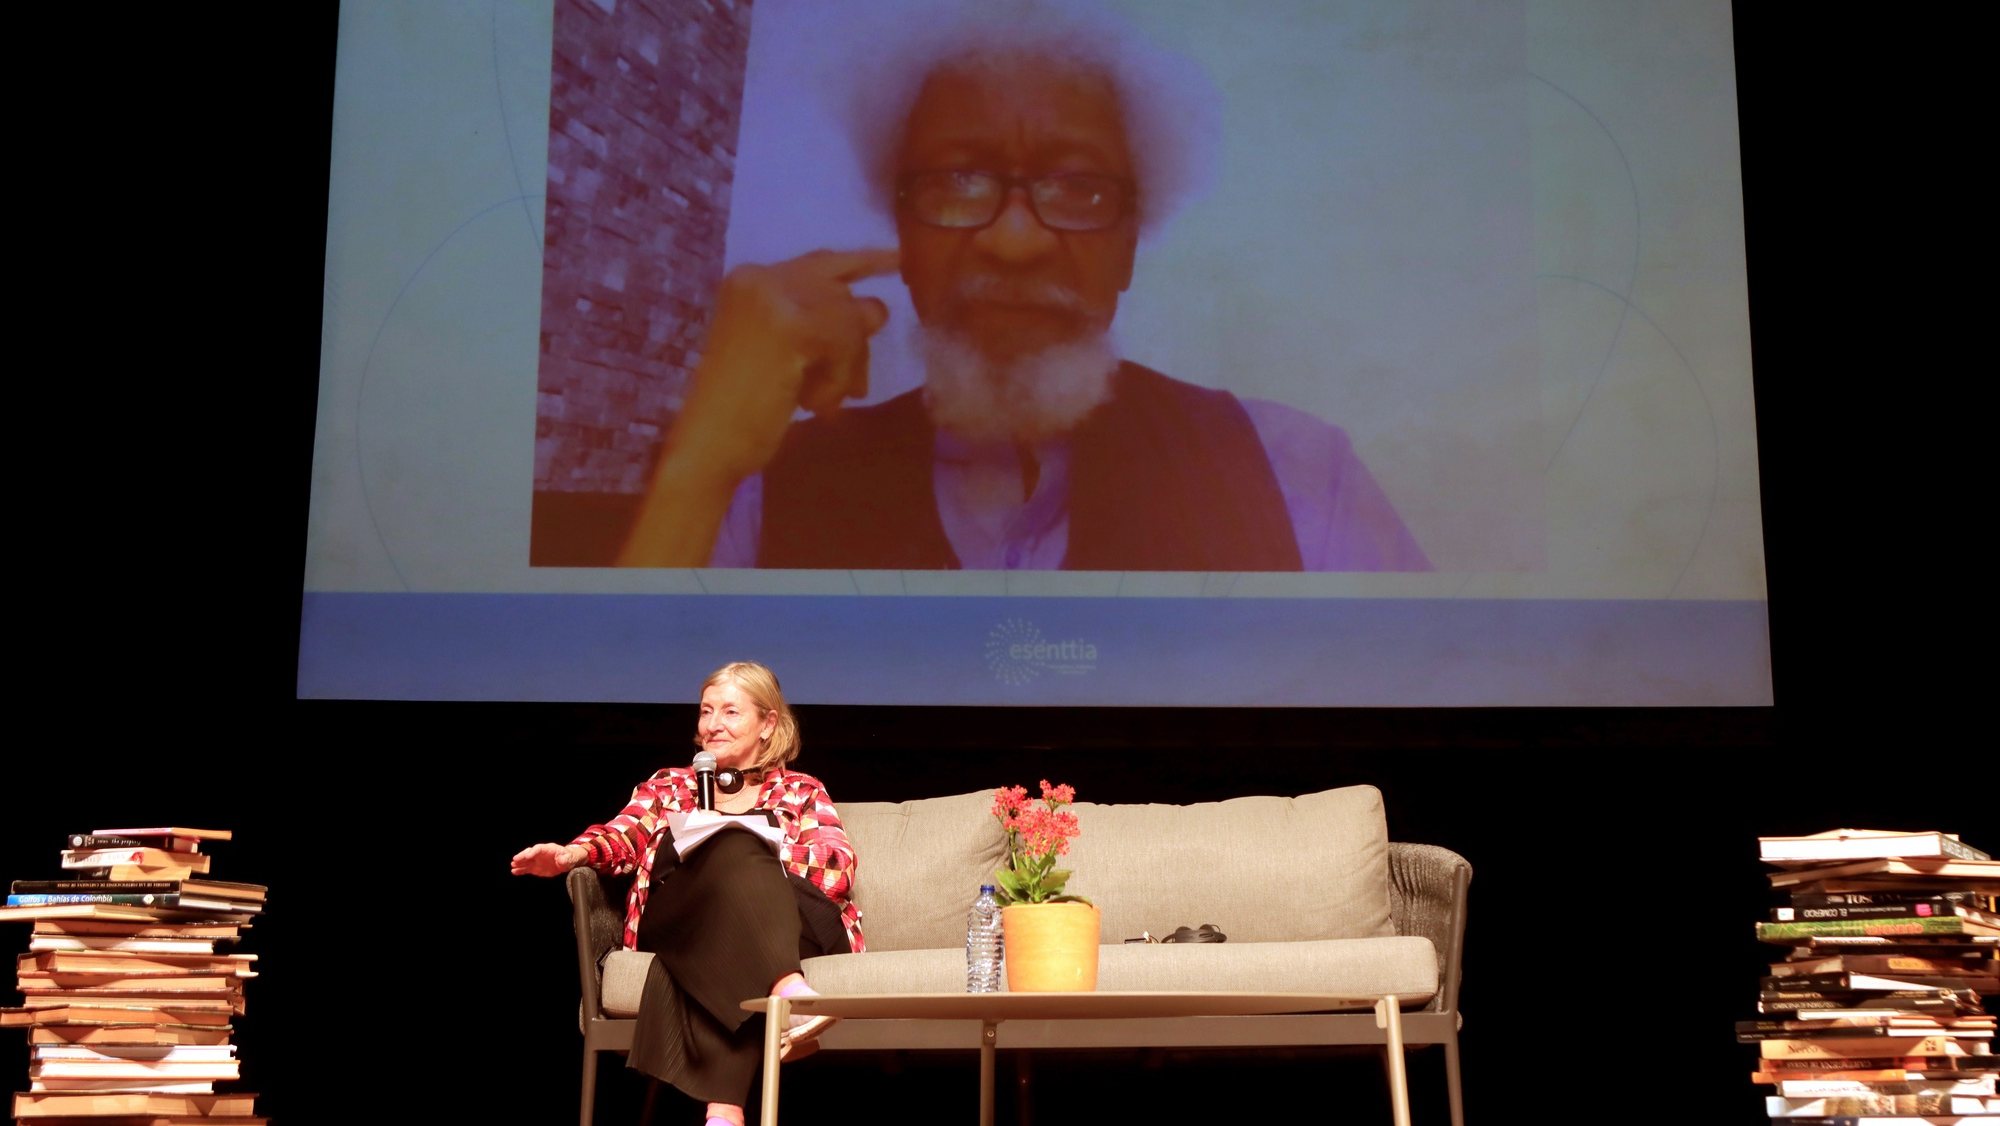 epa09718796 British journalist and writer Rosie Boycott speaks with Nigerian writer Wole Soyinka (on screen), during a conversation as part of the Hay Festival in Cartagena, Colombia, 30 January 2022. Nigerian Wole Soyinka, the first African and the first black writer to win the Nobel Prize for Literature in 1986, spoke about his activism on literature, which he said arose from when he was a child because all his life he has been &#039;quite curious&#039;. &#039;As a child I was quite curious, I was always asking and my curiosity took me to my father&#039;s library, to anything that was written, it didn&#039;t matter what it was&#039;, said the writer in a conversation with British journalist Rosie Boycott in the Hay Festival of Cartagena de Indias.  EPA/RICARDO MALDONADO ROZO